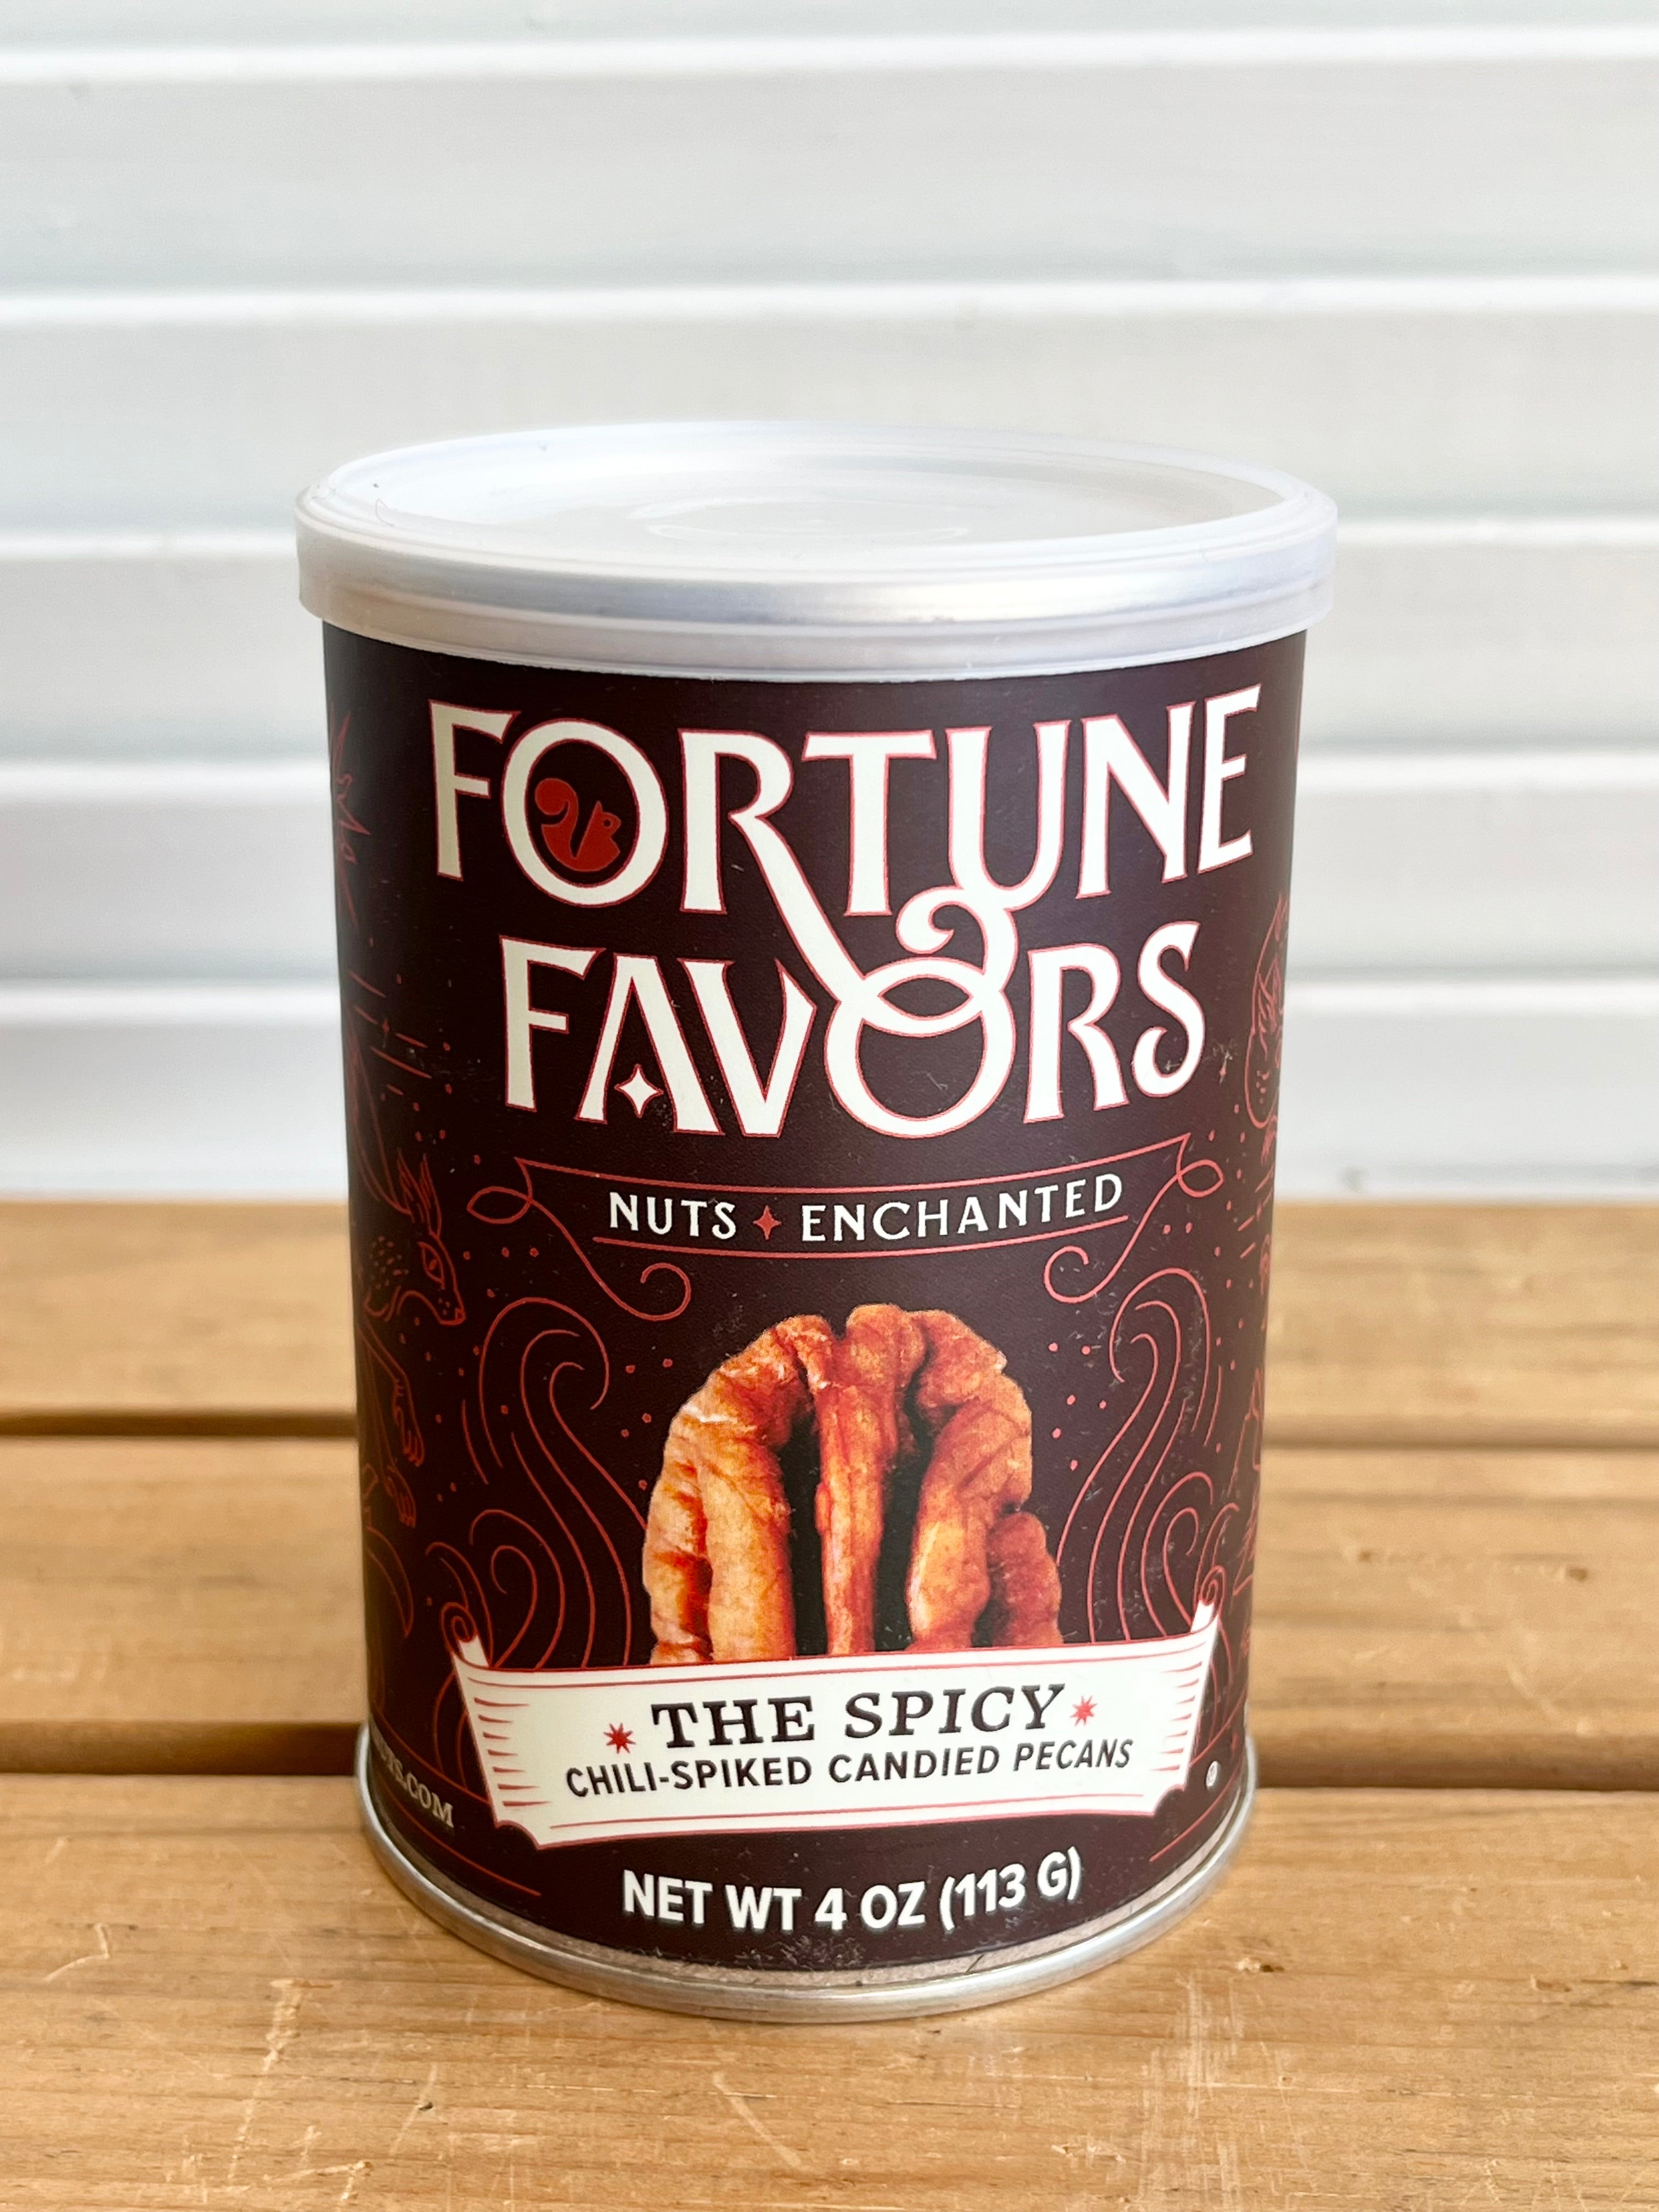 The Spicy Candied Pecans from Fortune Favors